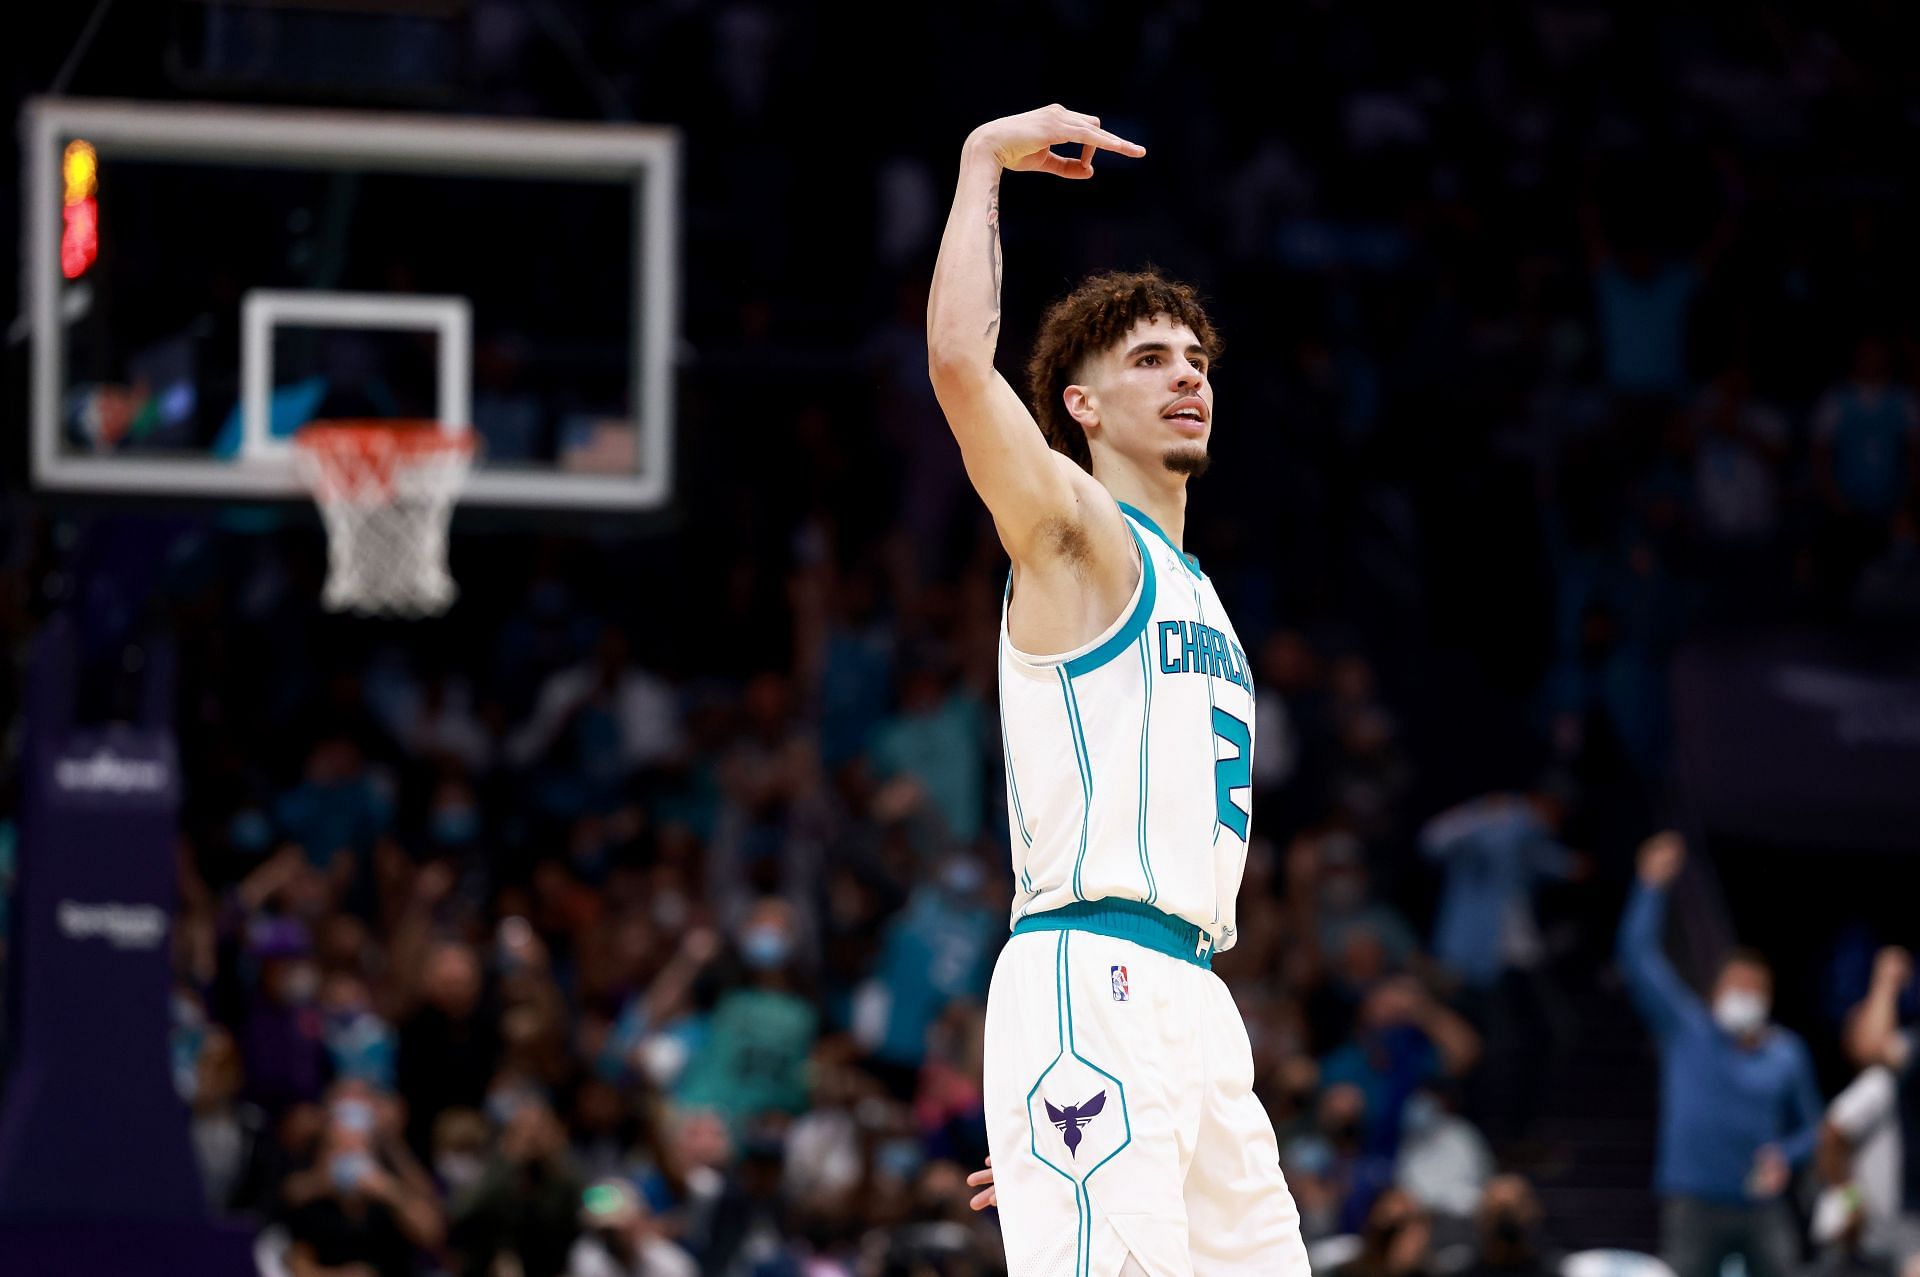 LaMelo Ball of the Charlotte Hornets against the Indiana Pacers